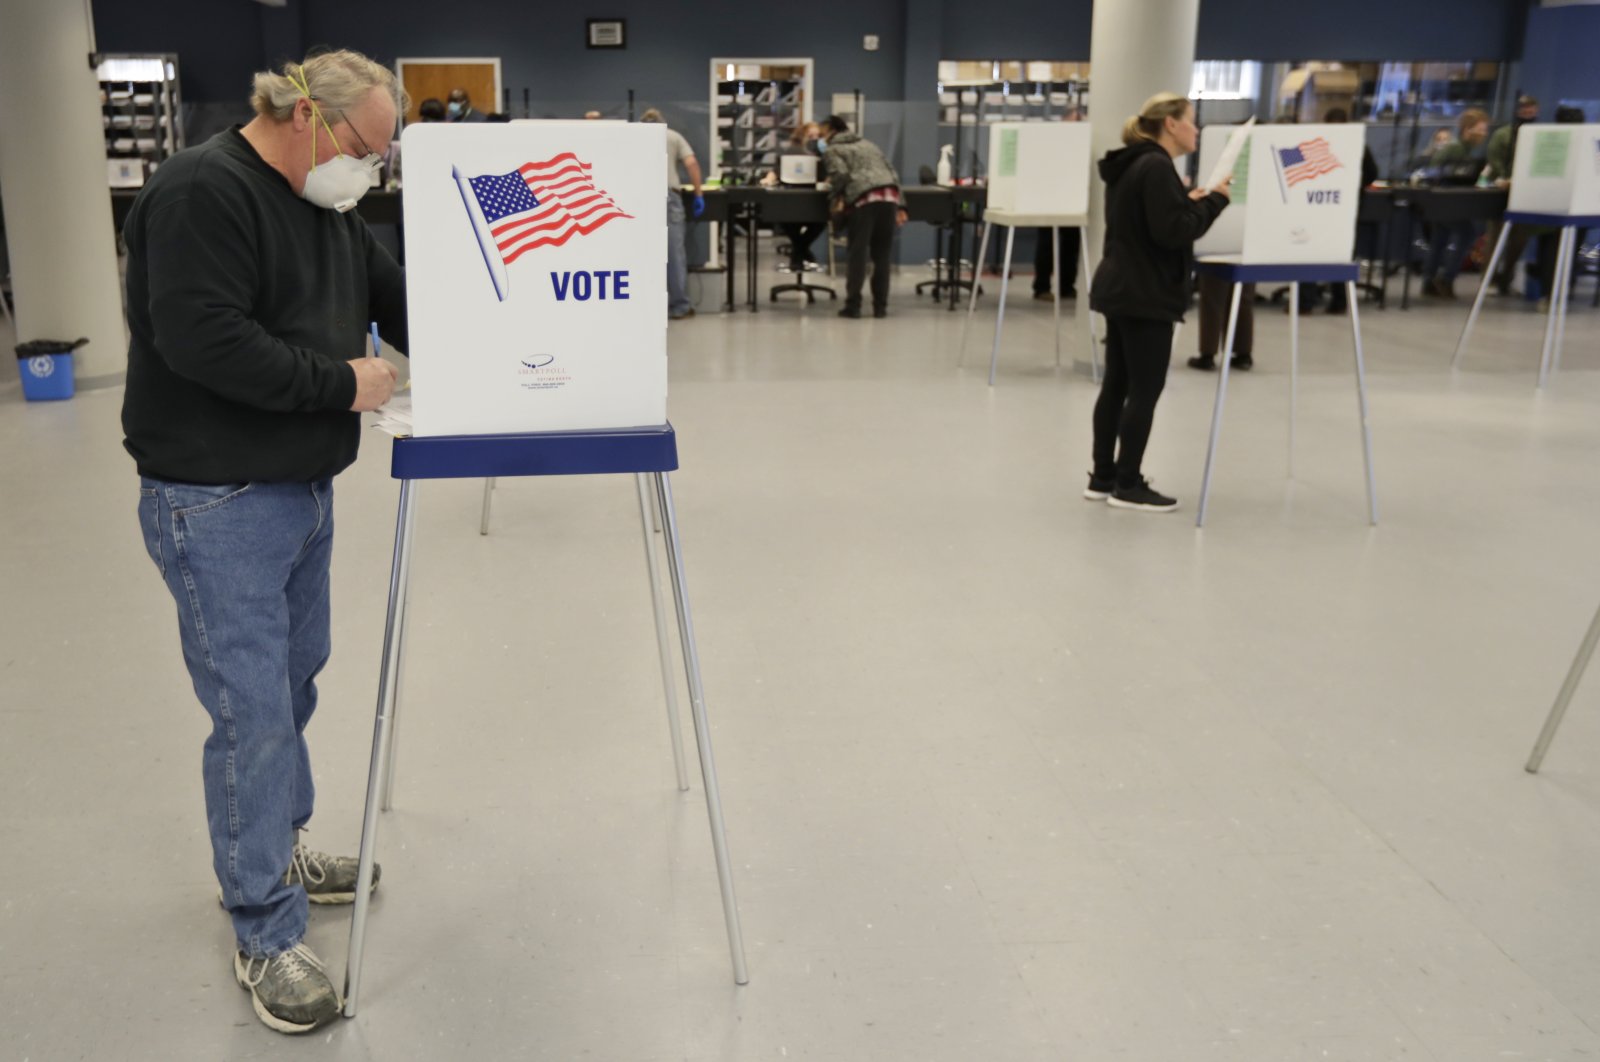 People are voting while social distancing at the Cuyahoga County Board of Elections, Cleveland, Ohio, U.S., April 28, 2020. (AP Photo)